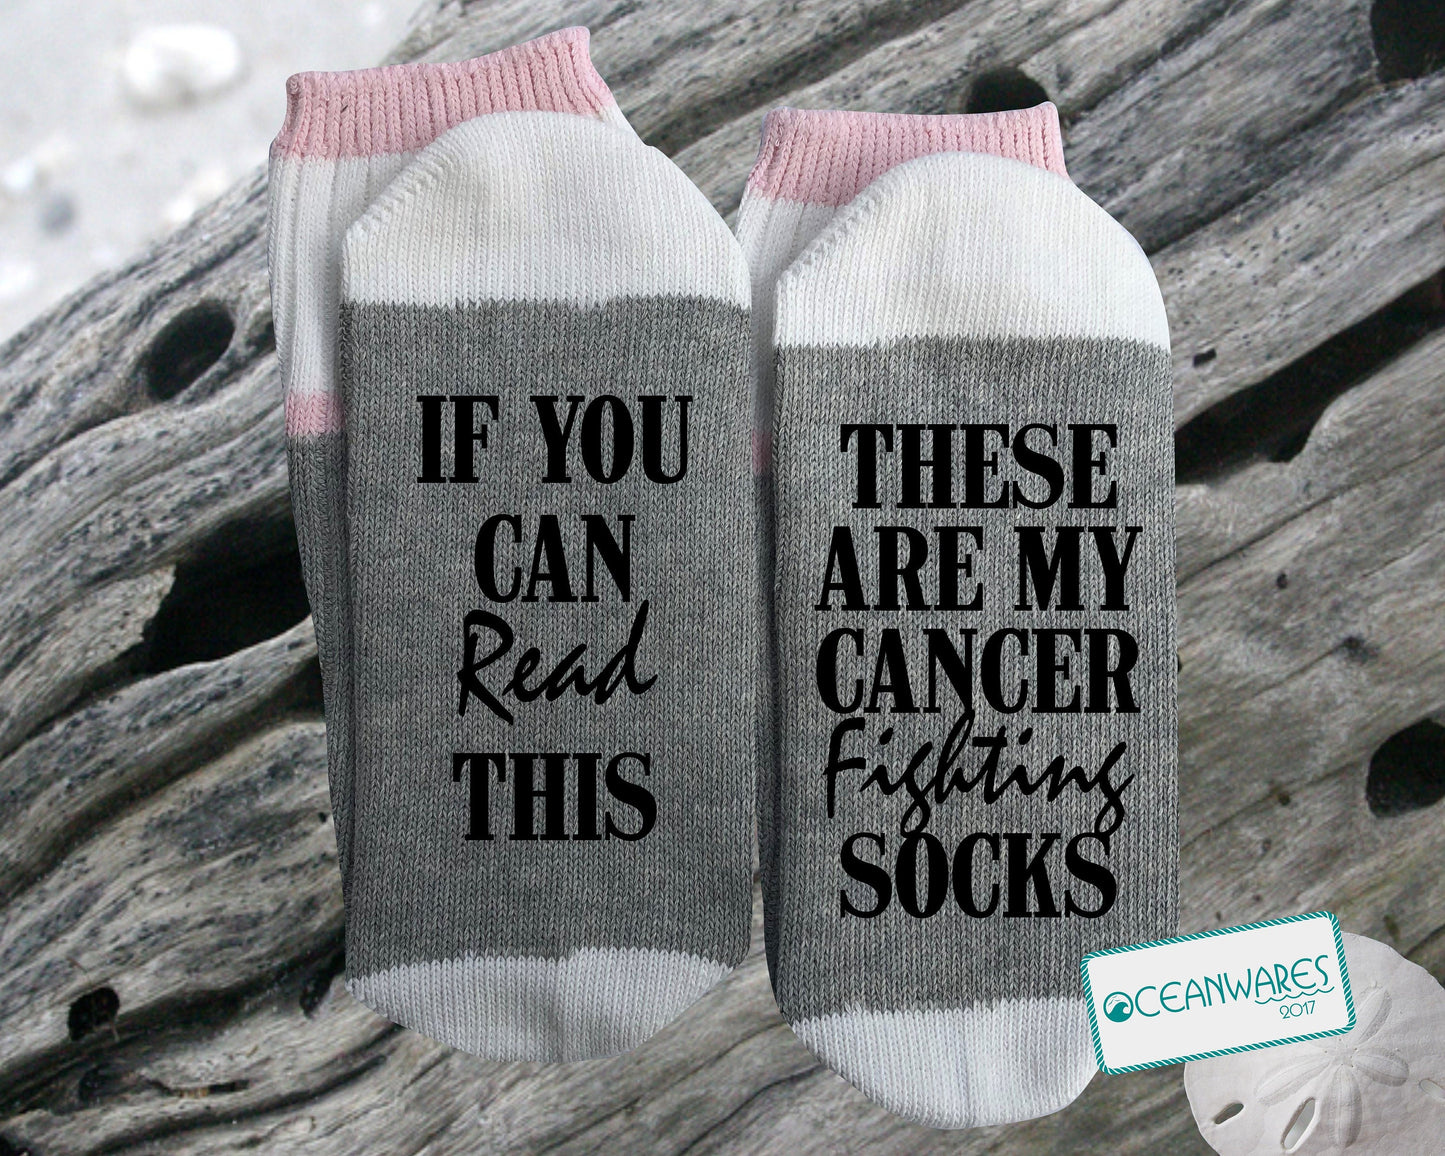 These are my Cancer fighting SOCKS, SUPER SOFT Novelty Word SOCKS.